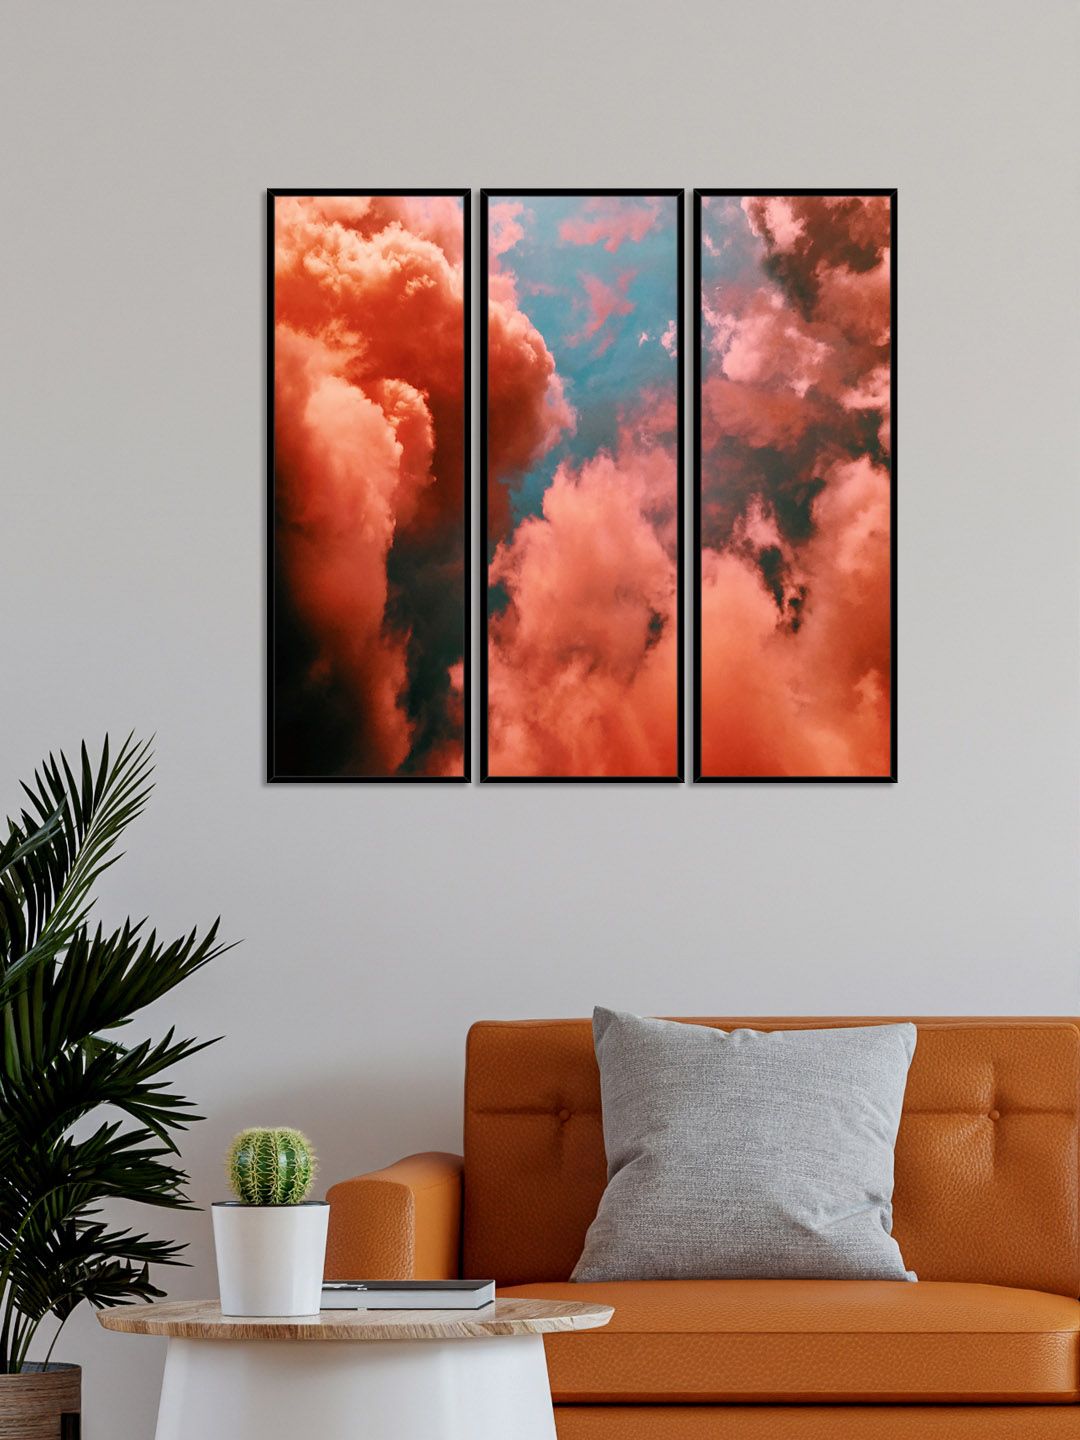 999Store Set Of 3 Multi-Coloured Beautiful Clouds Printed Framed Wall Art Price in India